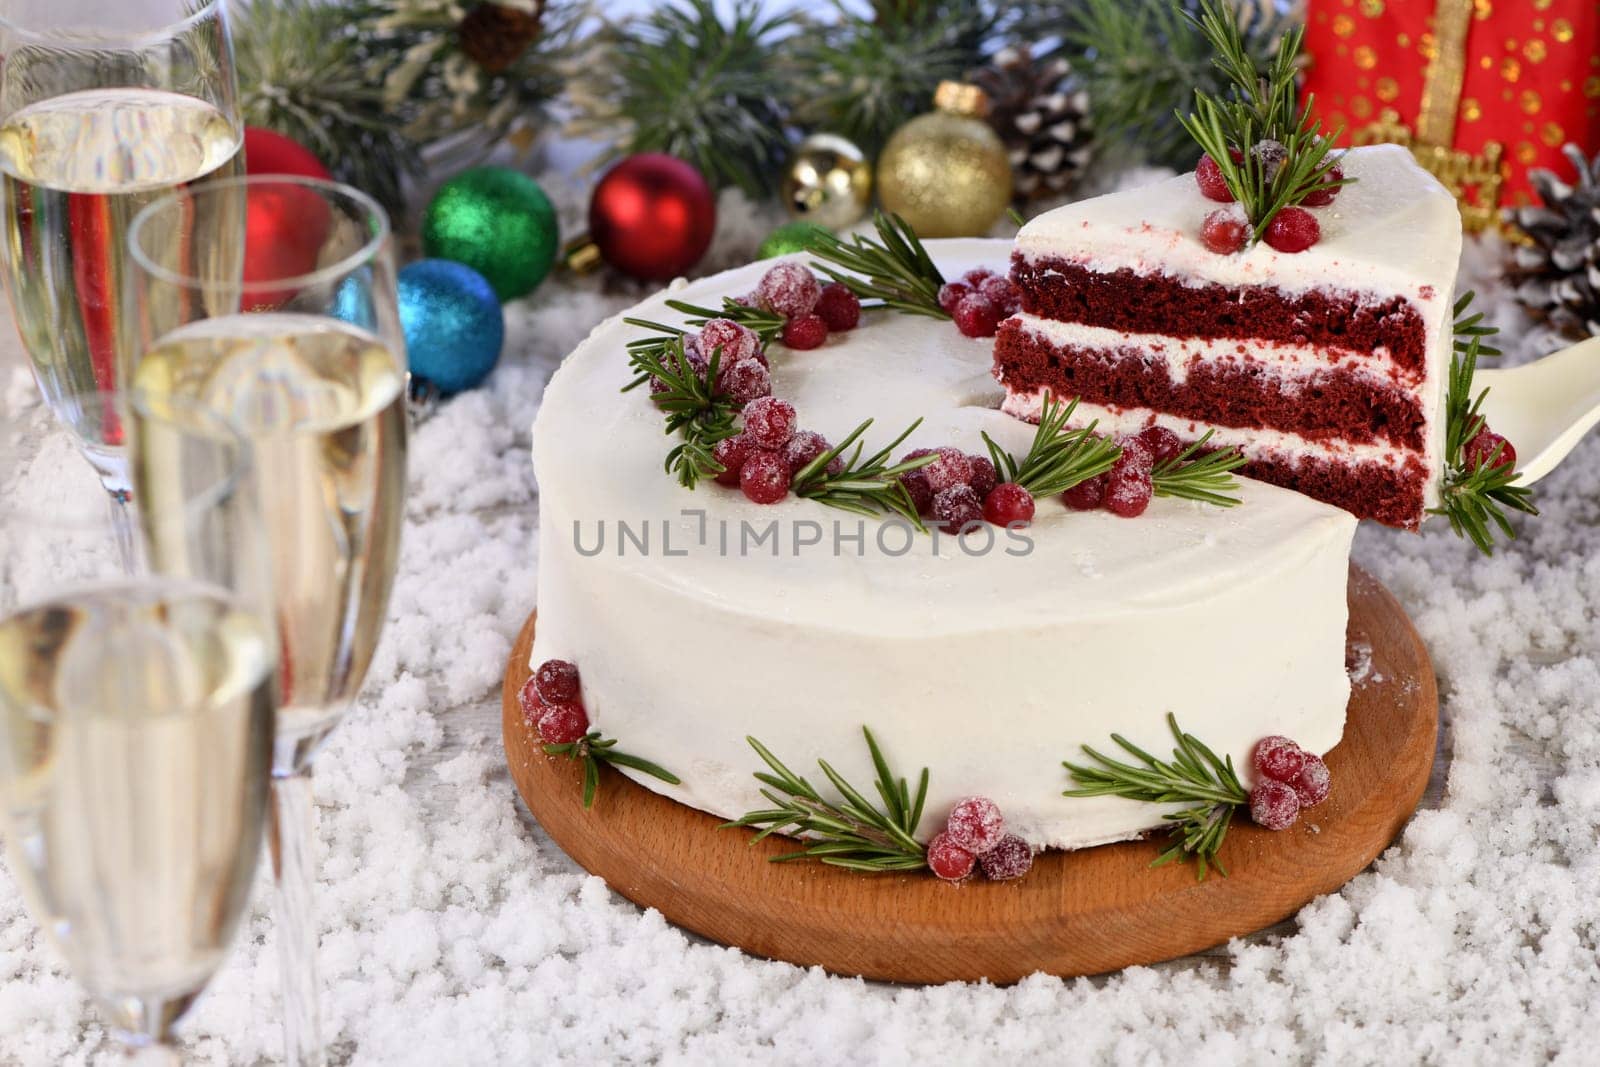 Cake for Christmas by Apolonia